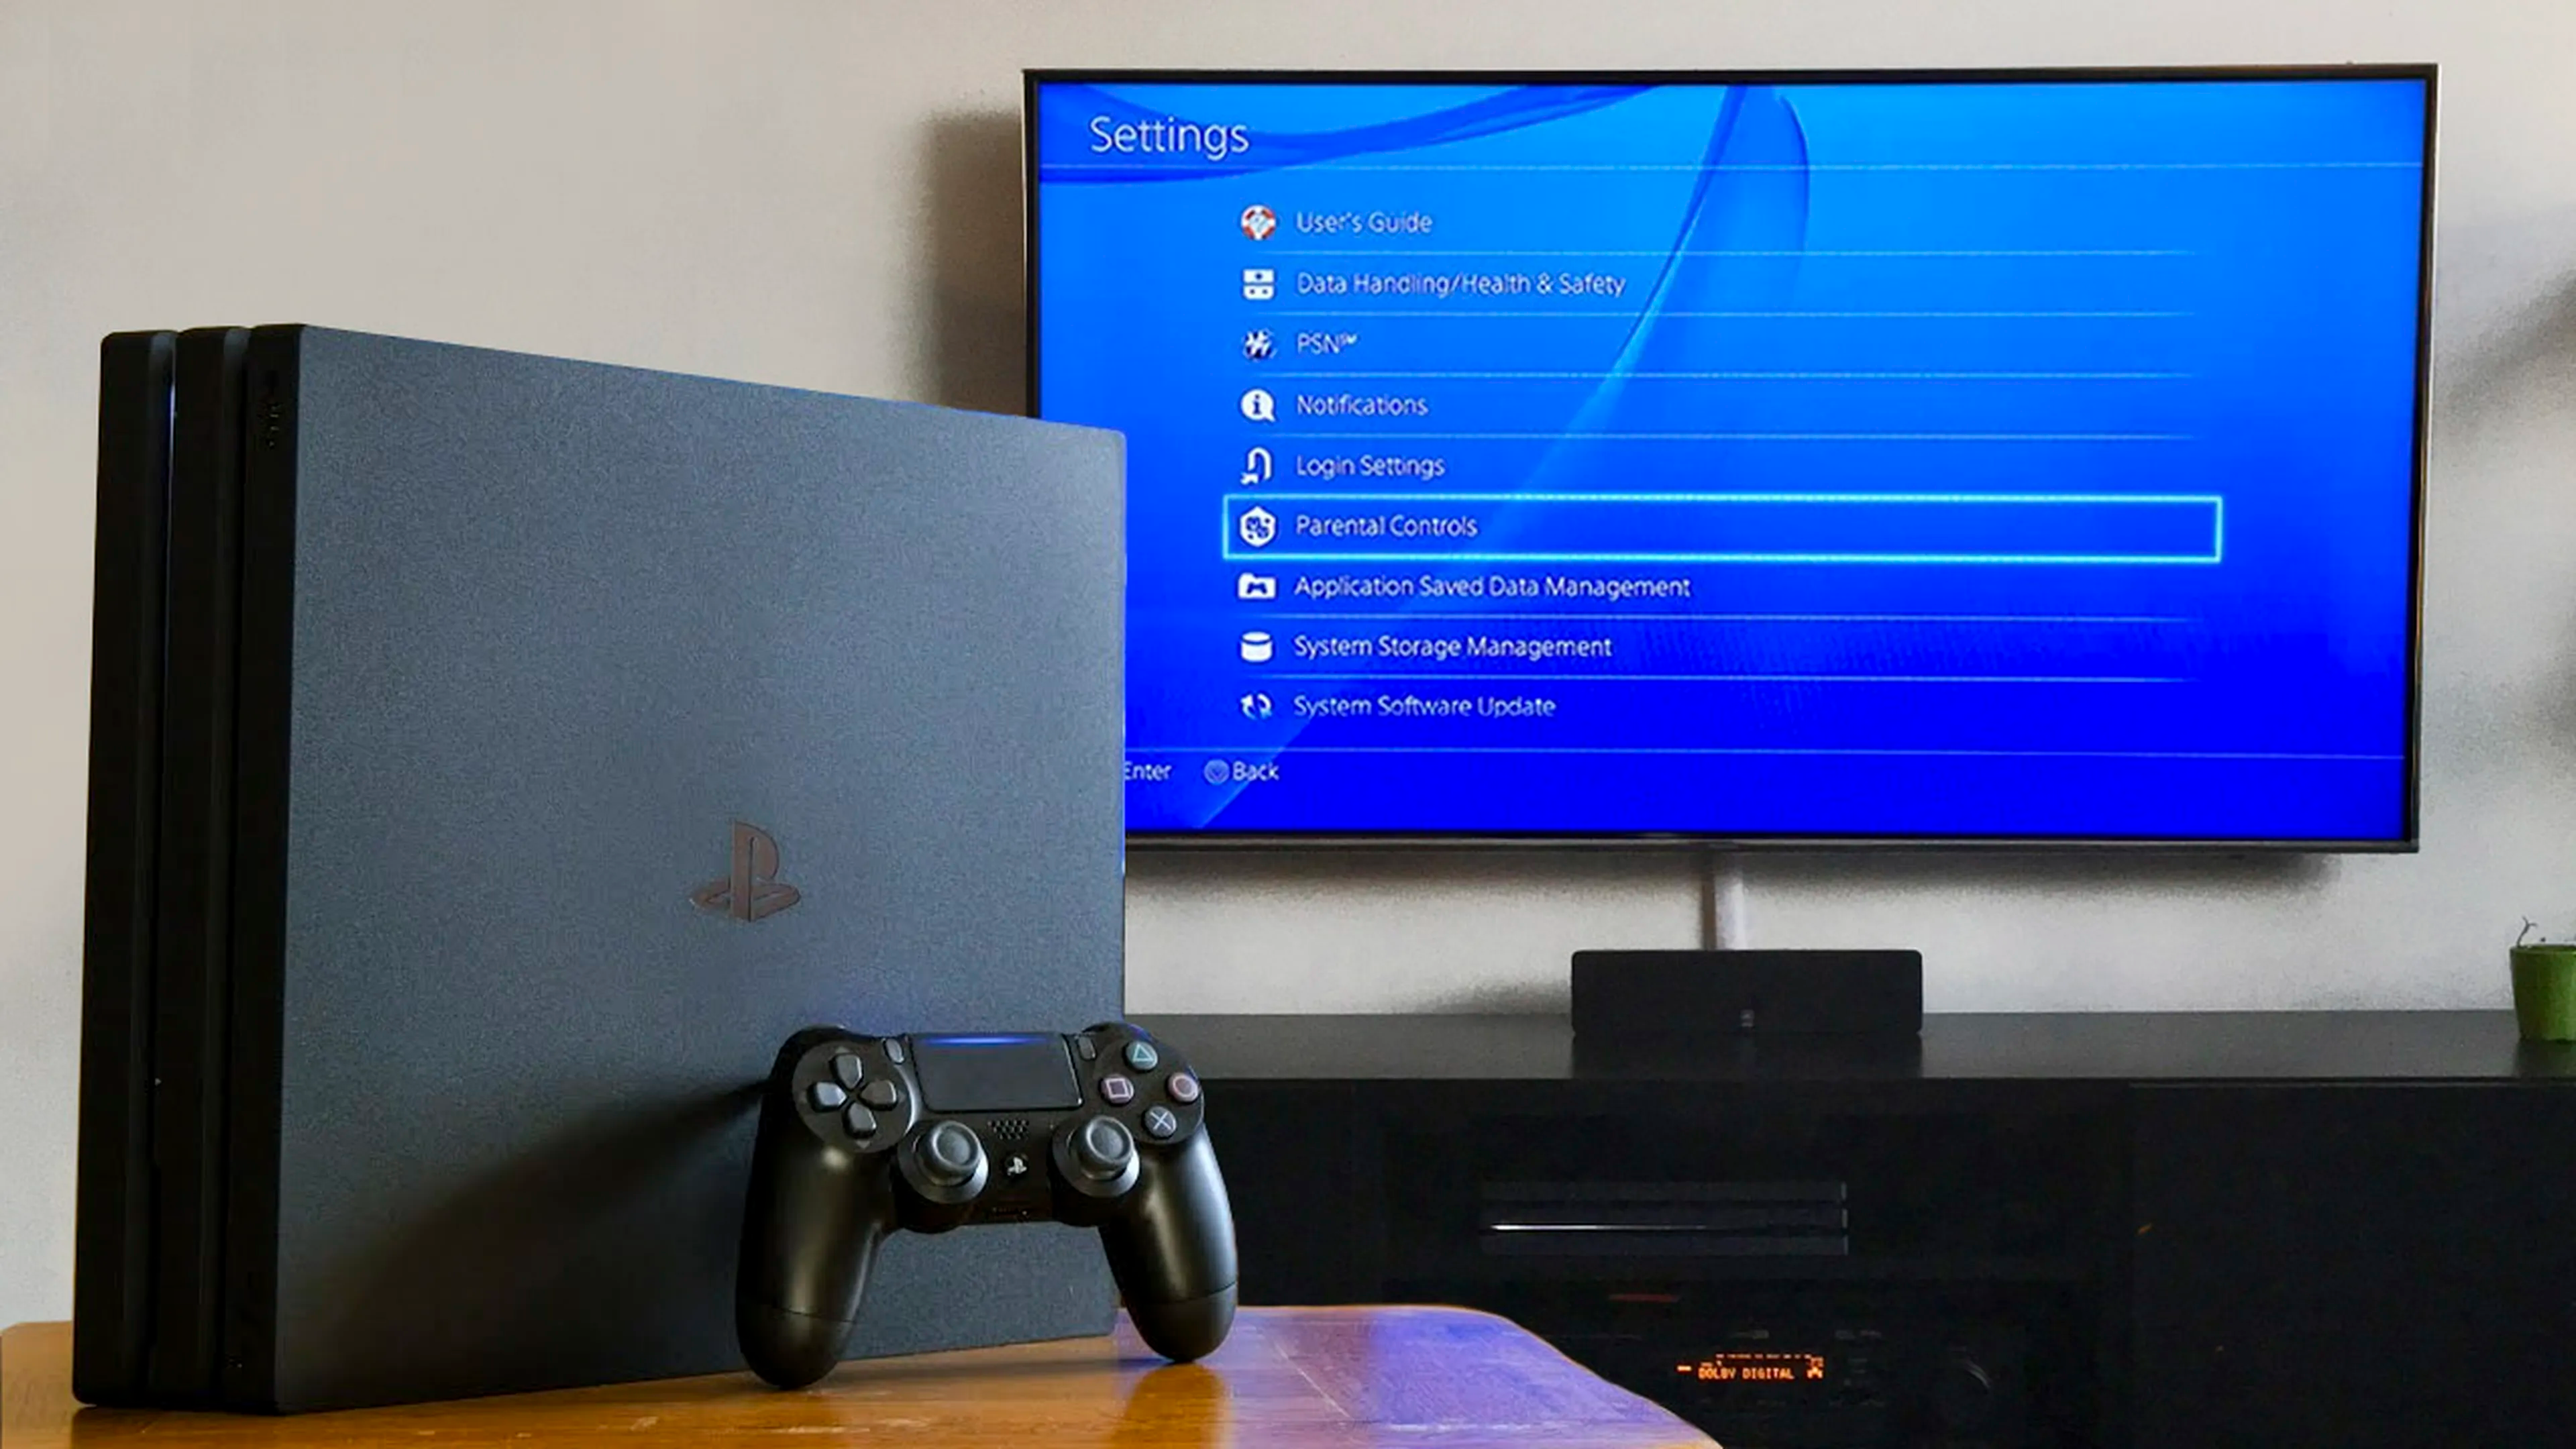 Average Electricity cost For a PlayStation 4